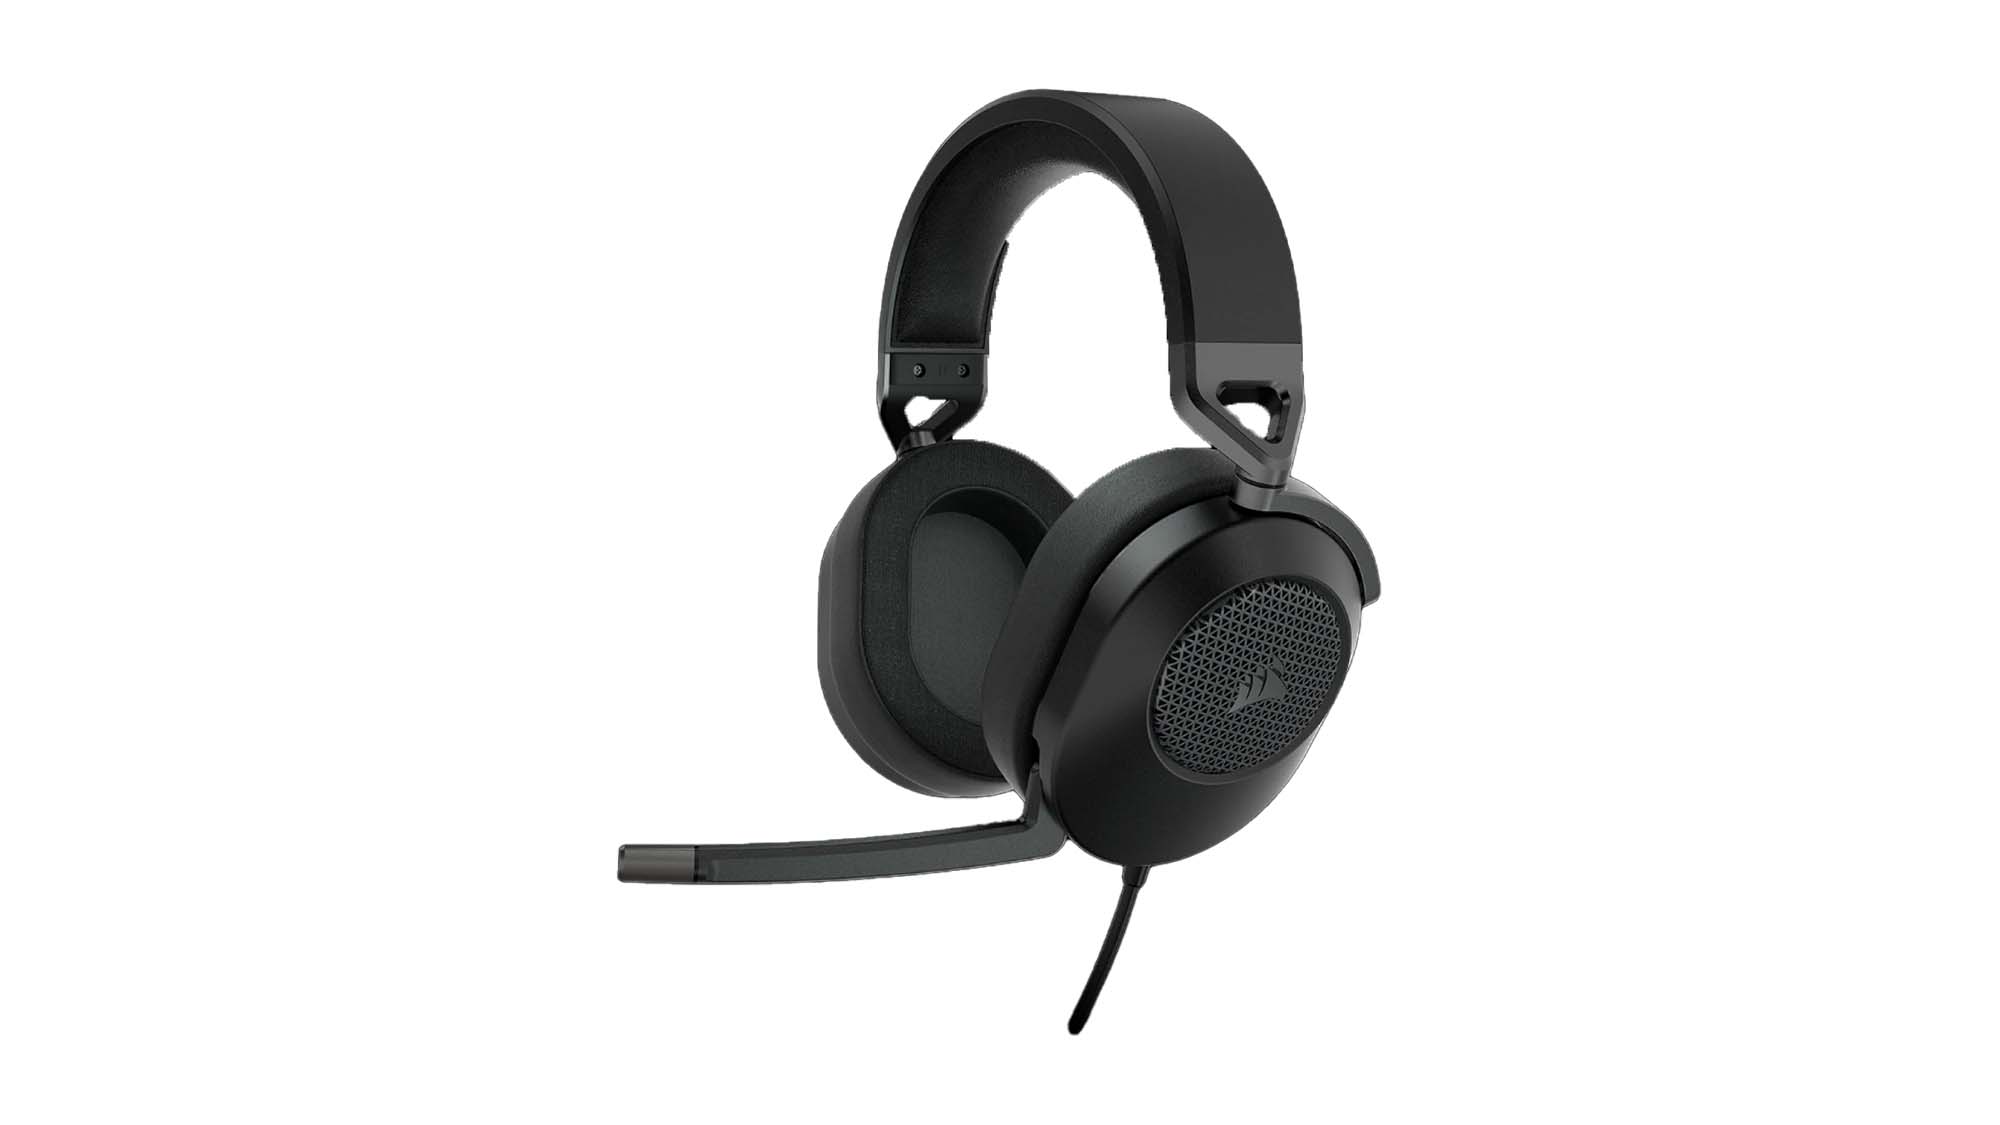 A Corsiar HS65 Surround gaming headset against a white background